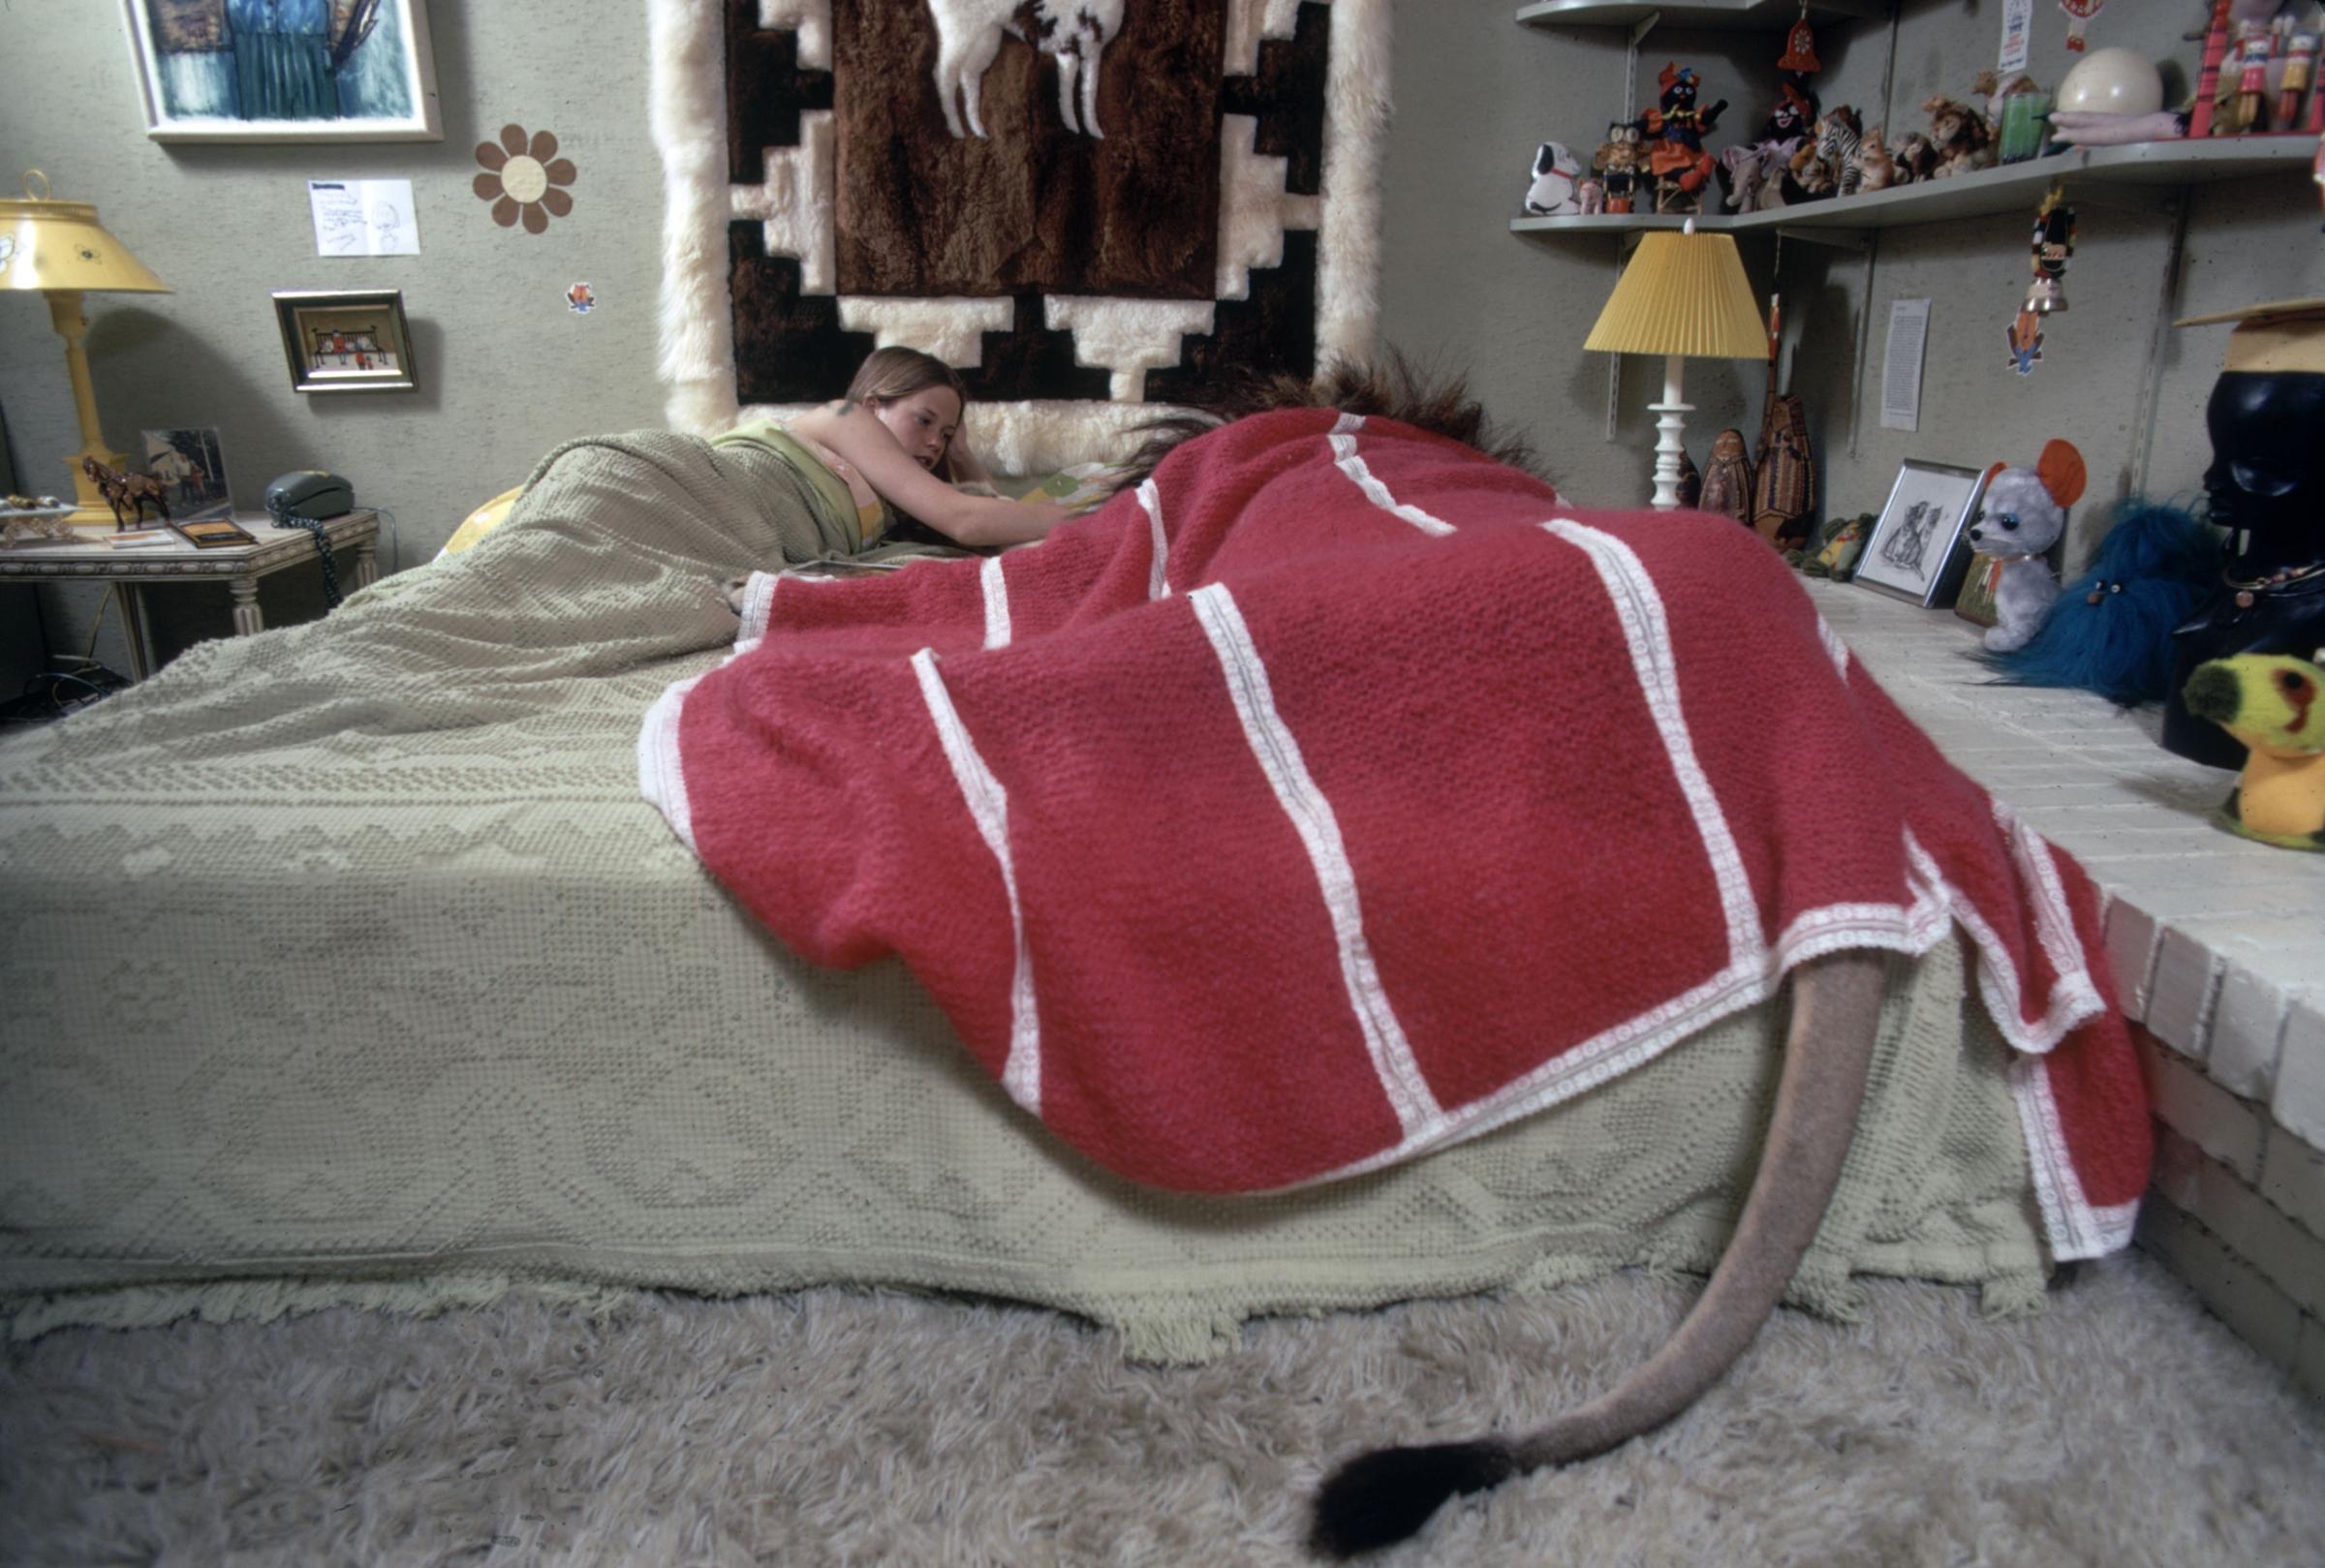 Melanie Griffith in bed with Neil the lion, 1971.